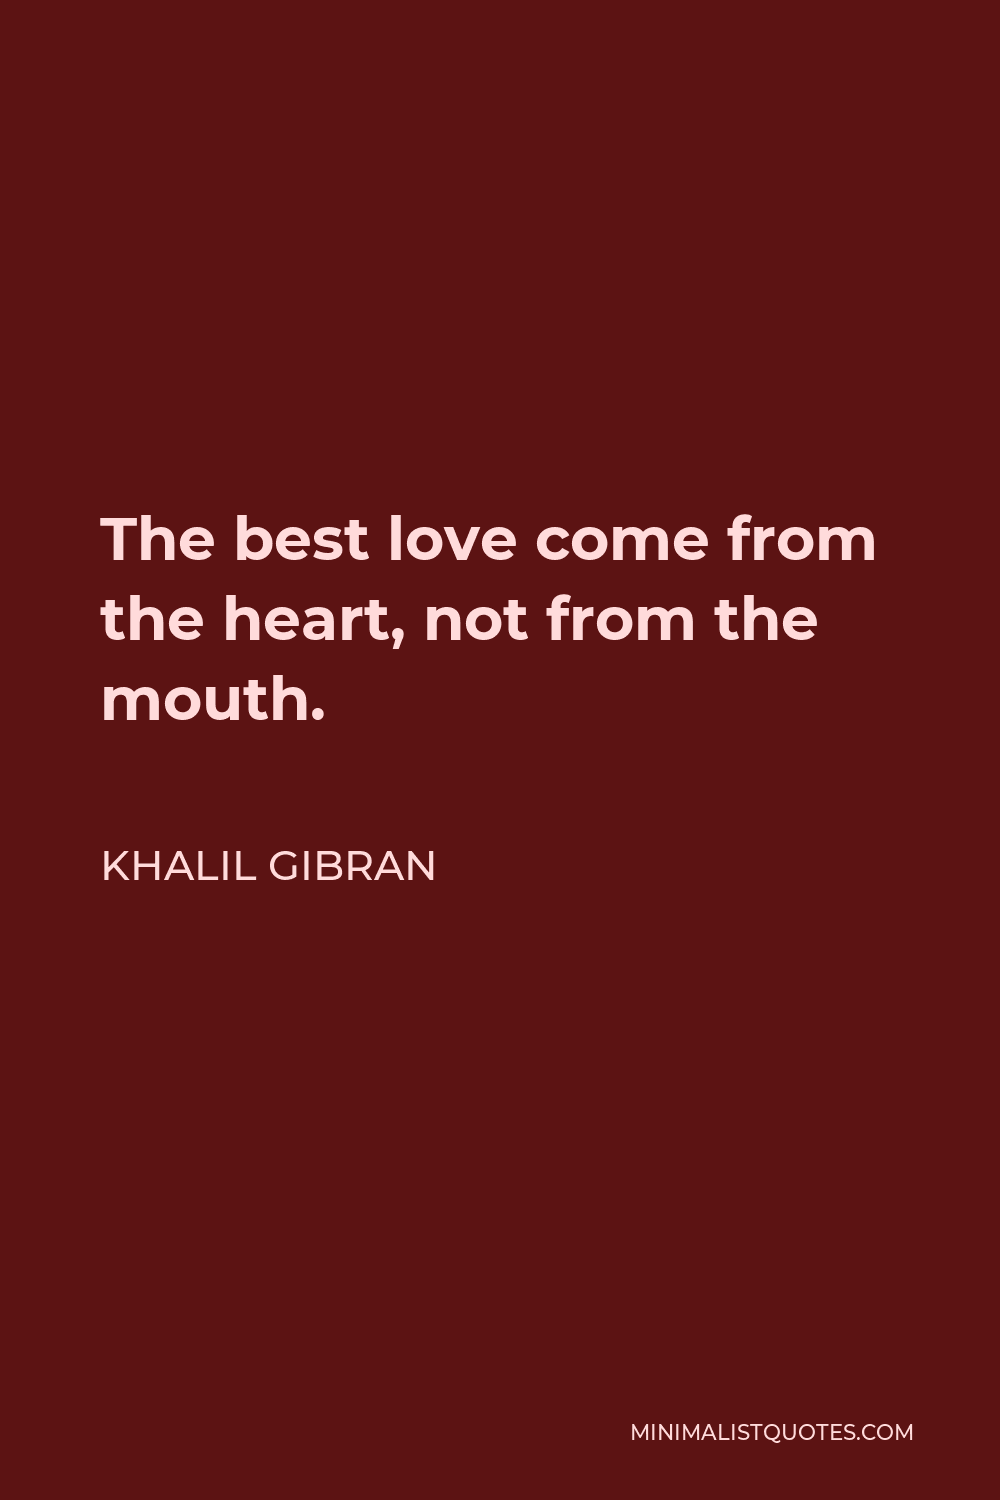 Khalil Gibran Quote - The best love come from the heart, not from the mouth.